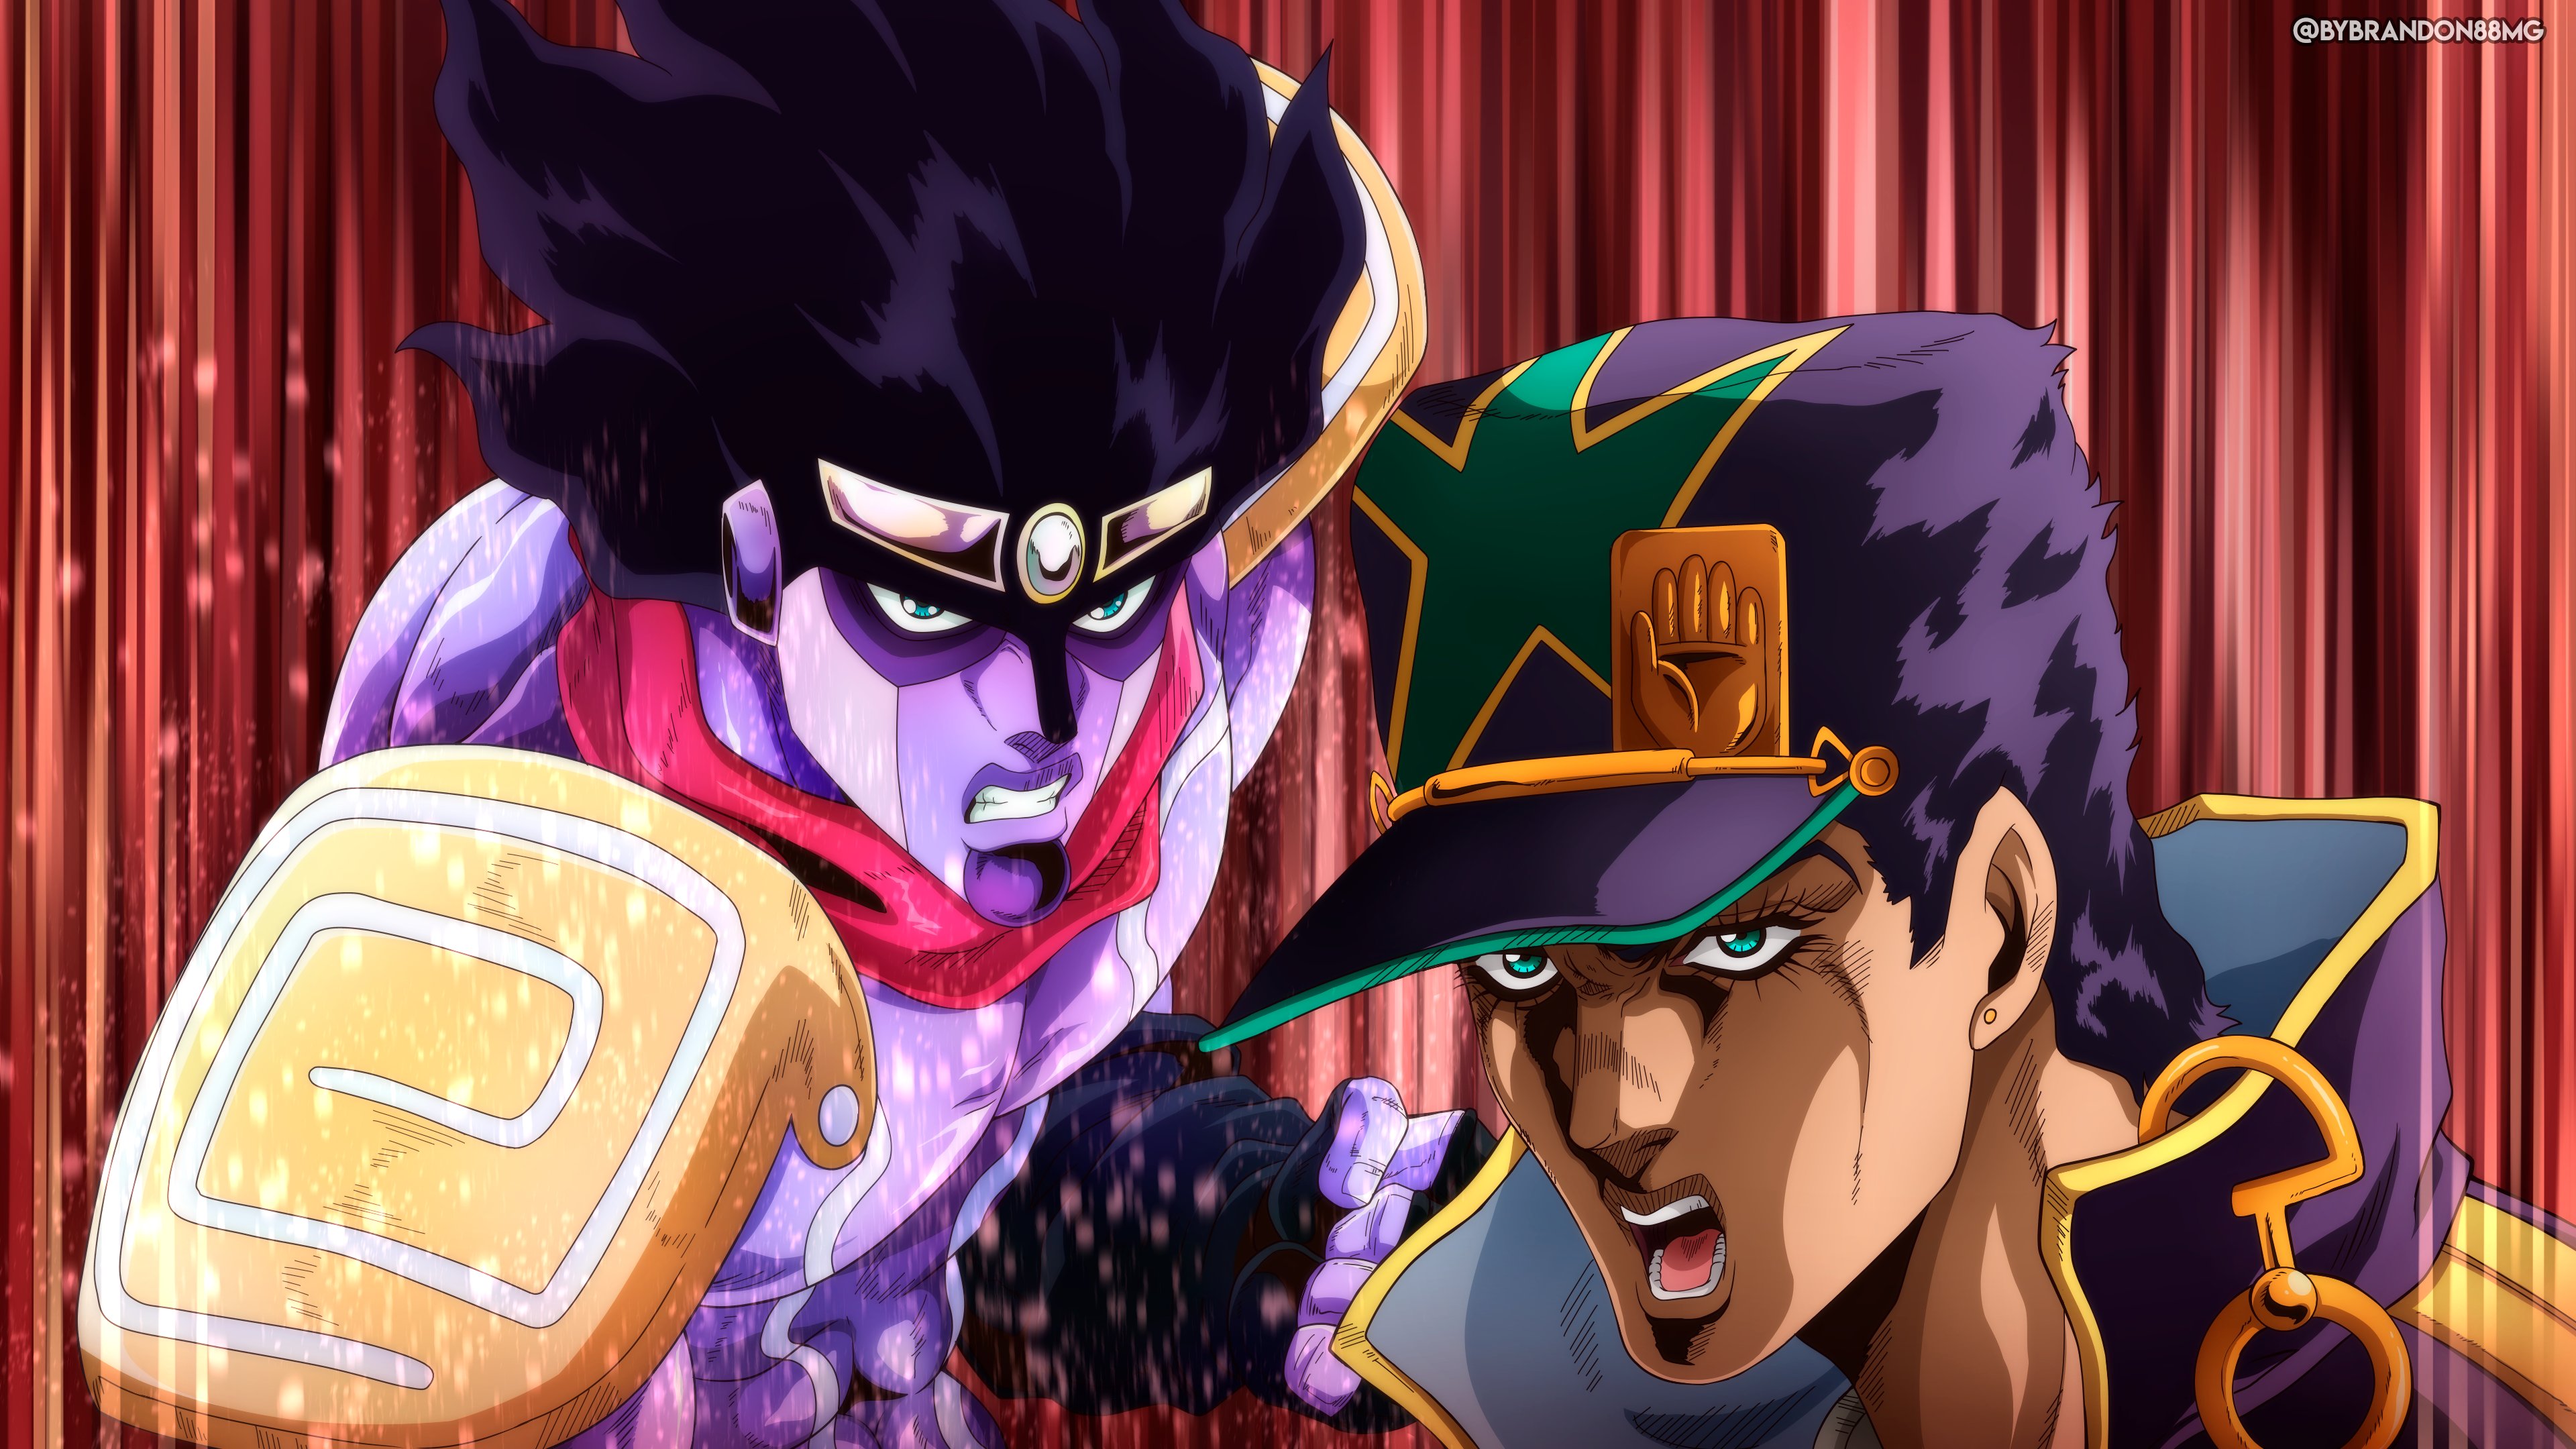 Something I realized about Part 6 Star Platinum